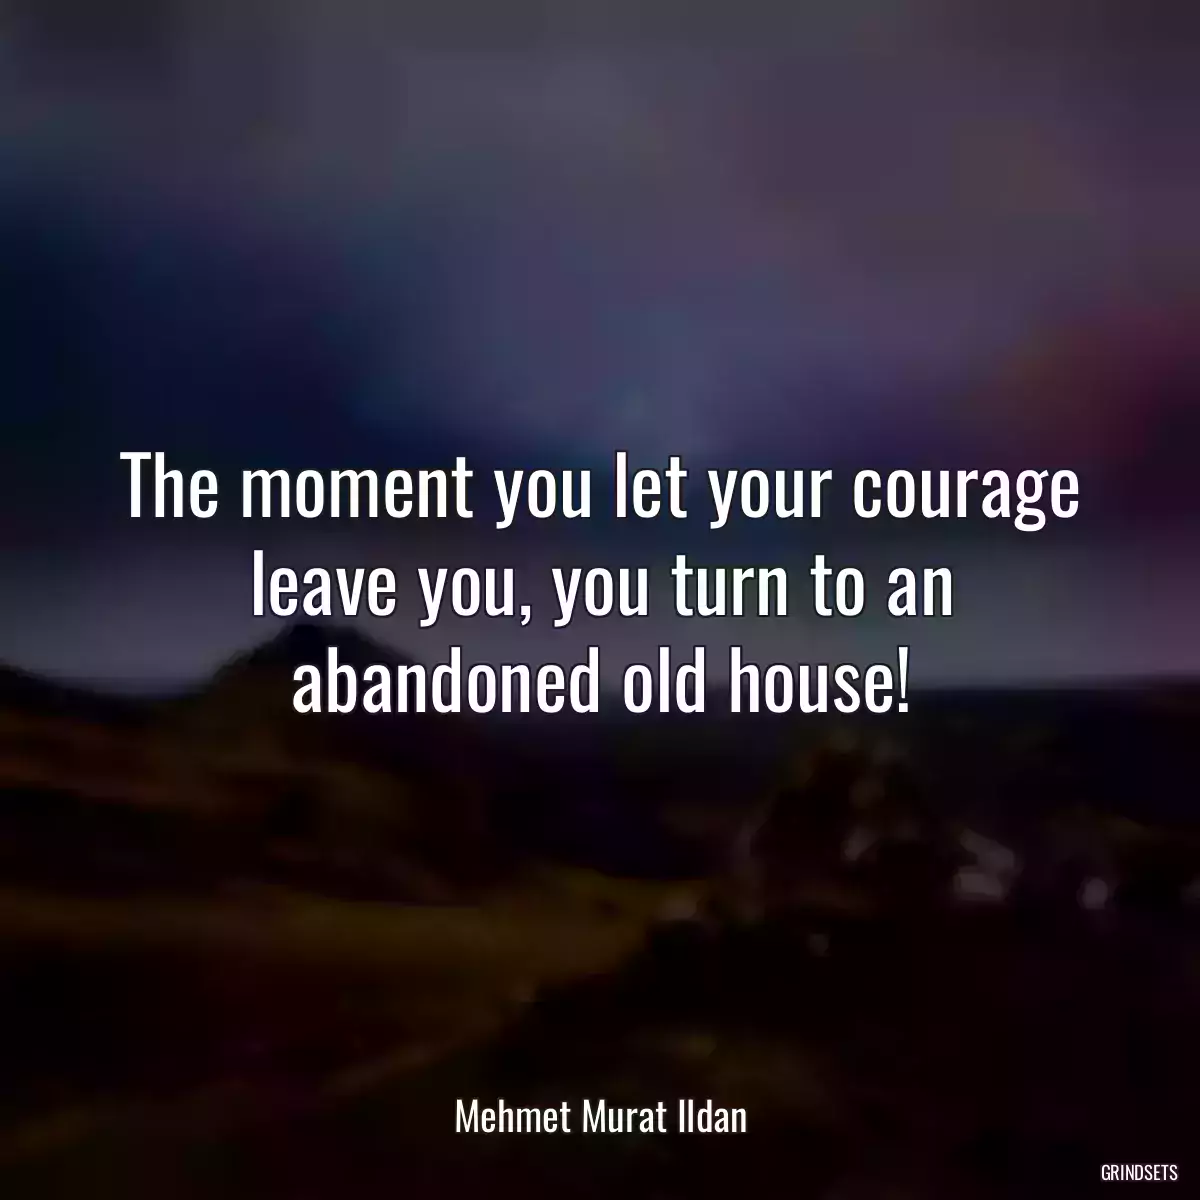 The moment you let your courage leave you, you turn to an abandoned old house!